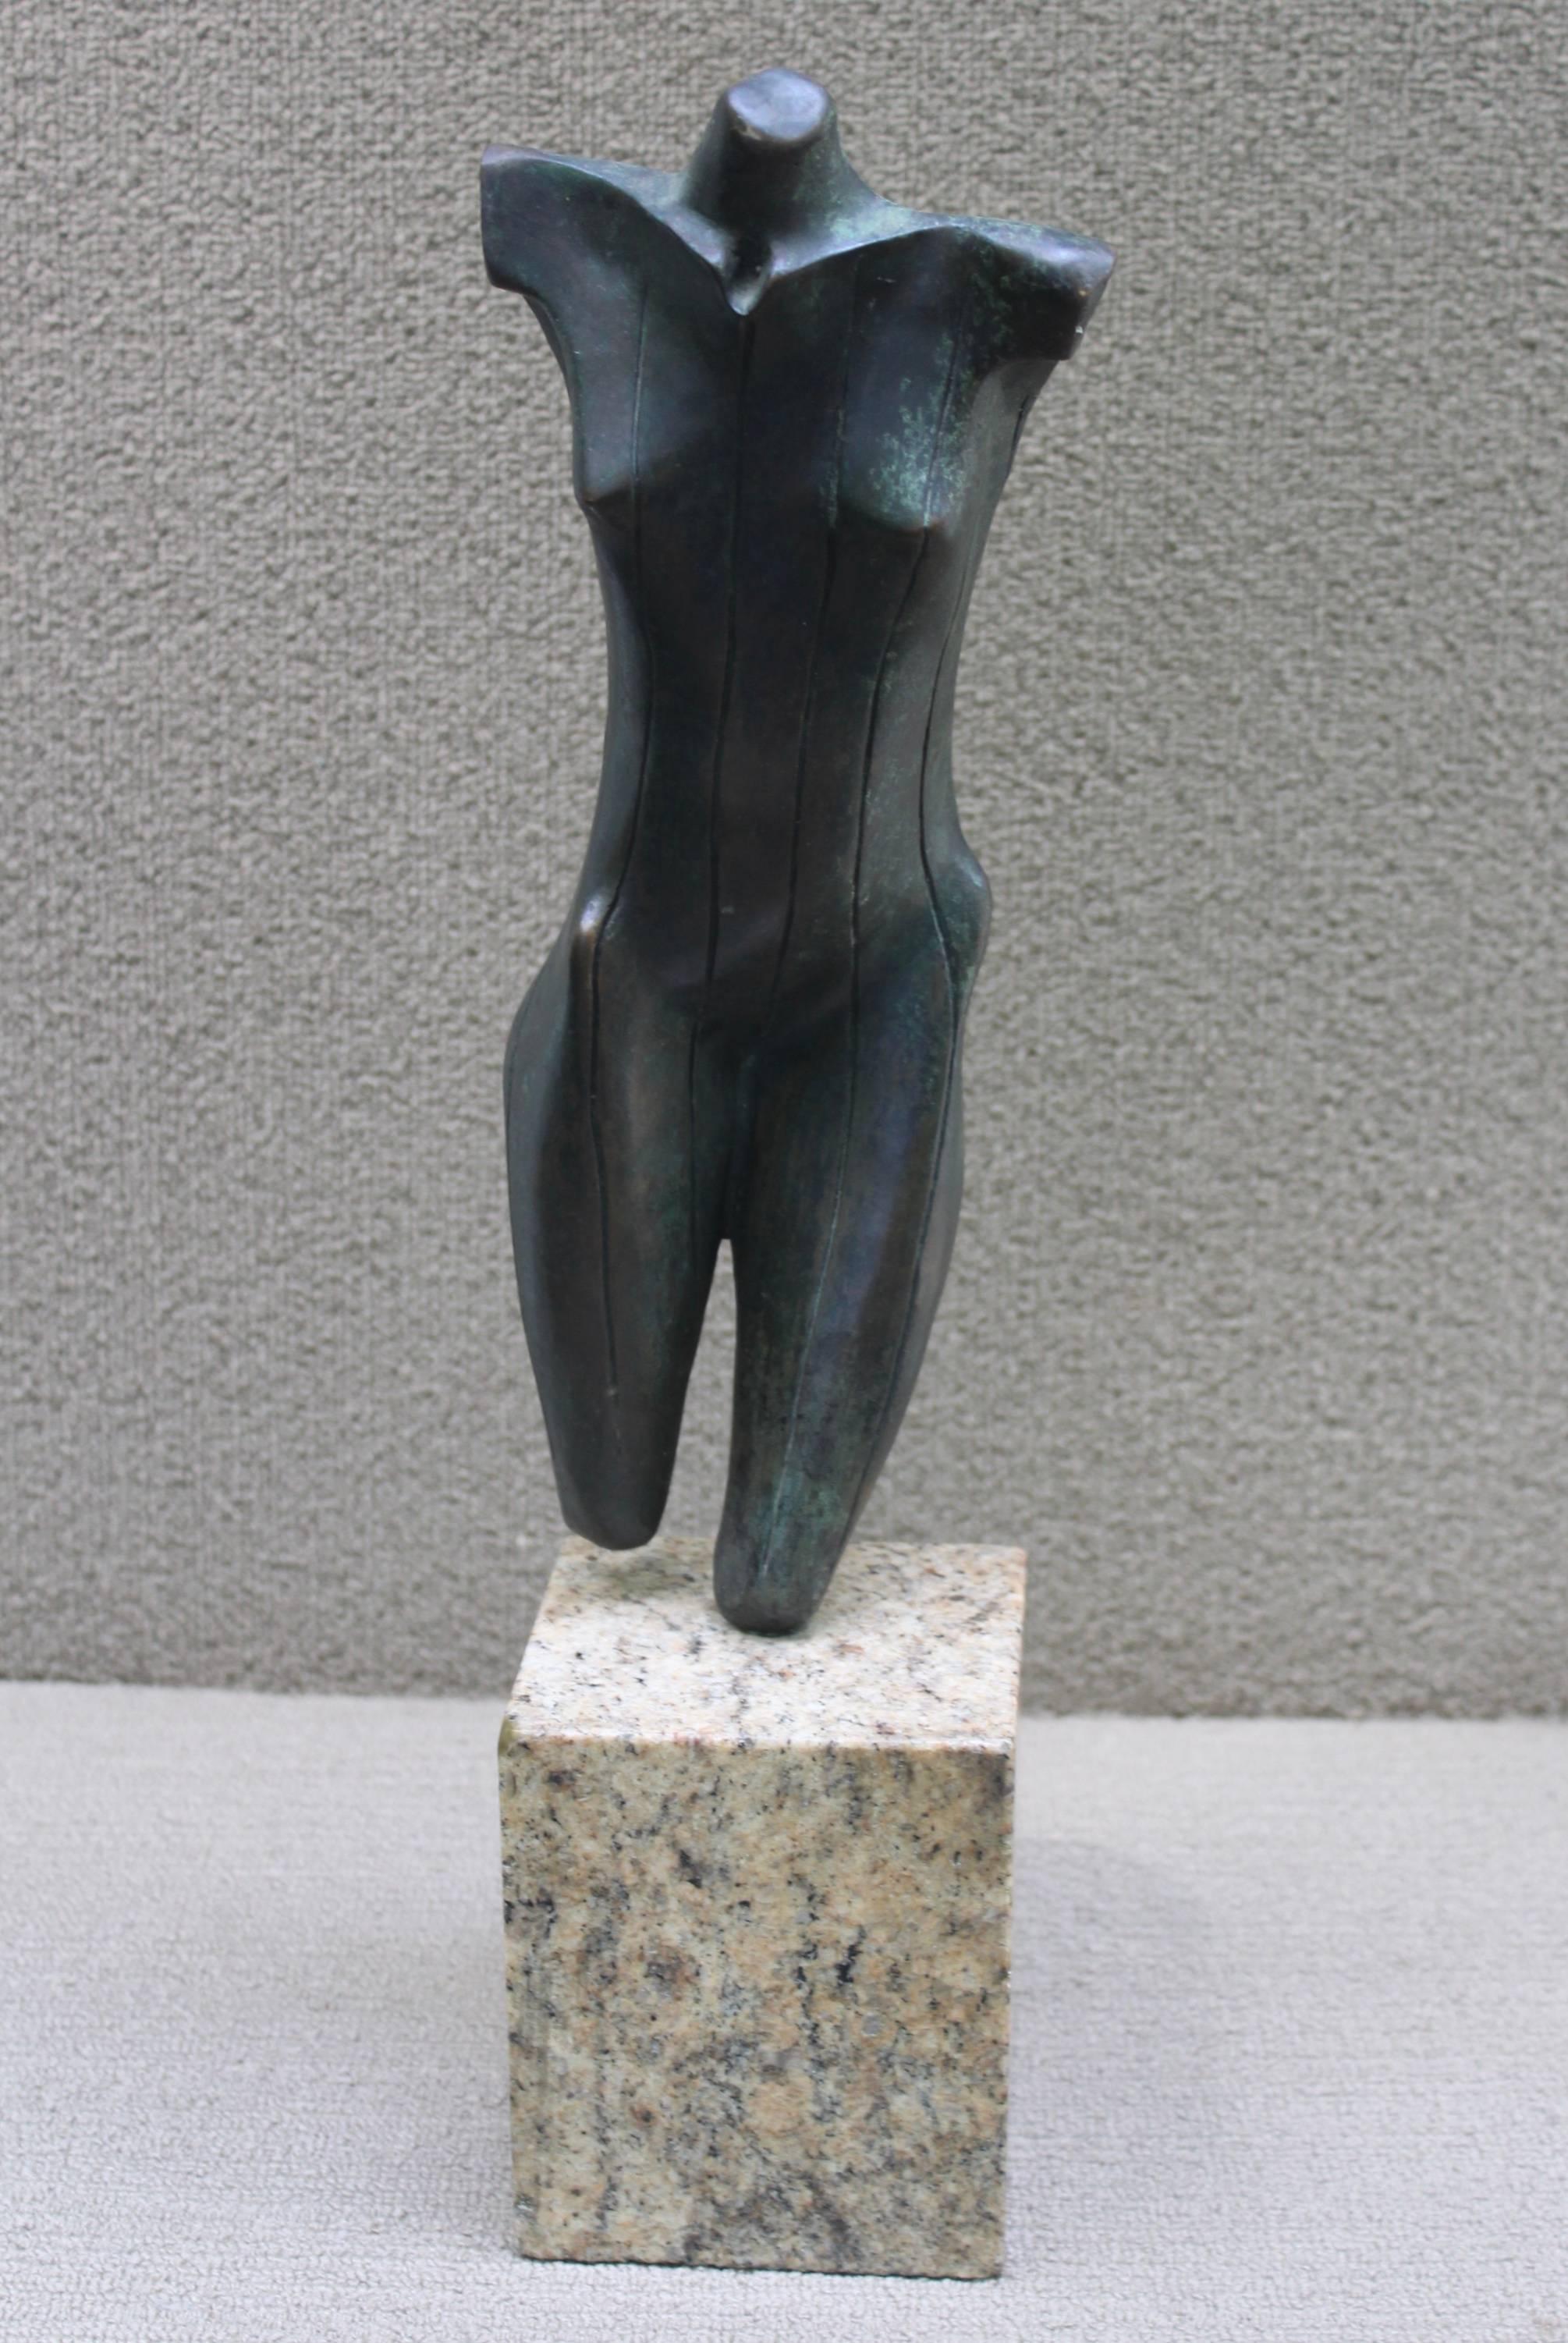 1970s modern bronze nude woman sculpture by Oxana Narozniak. Oxana Narozniak is a Ukrainian artist born in Germany then move to Brazil currently she lives in Miami.